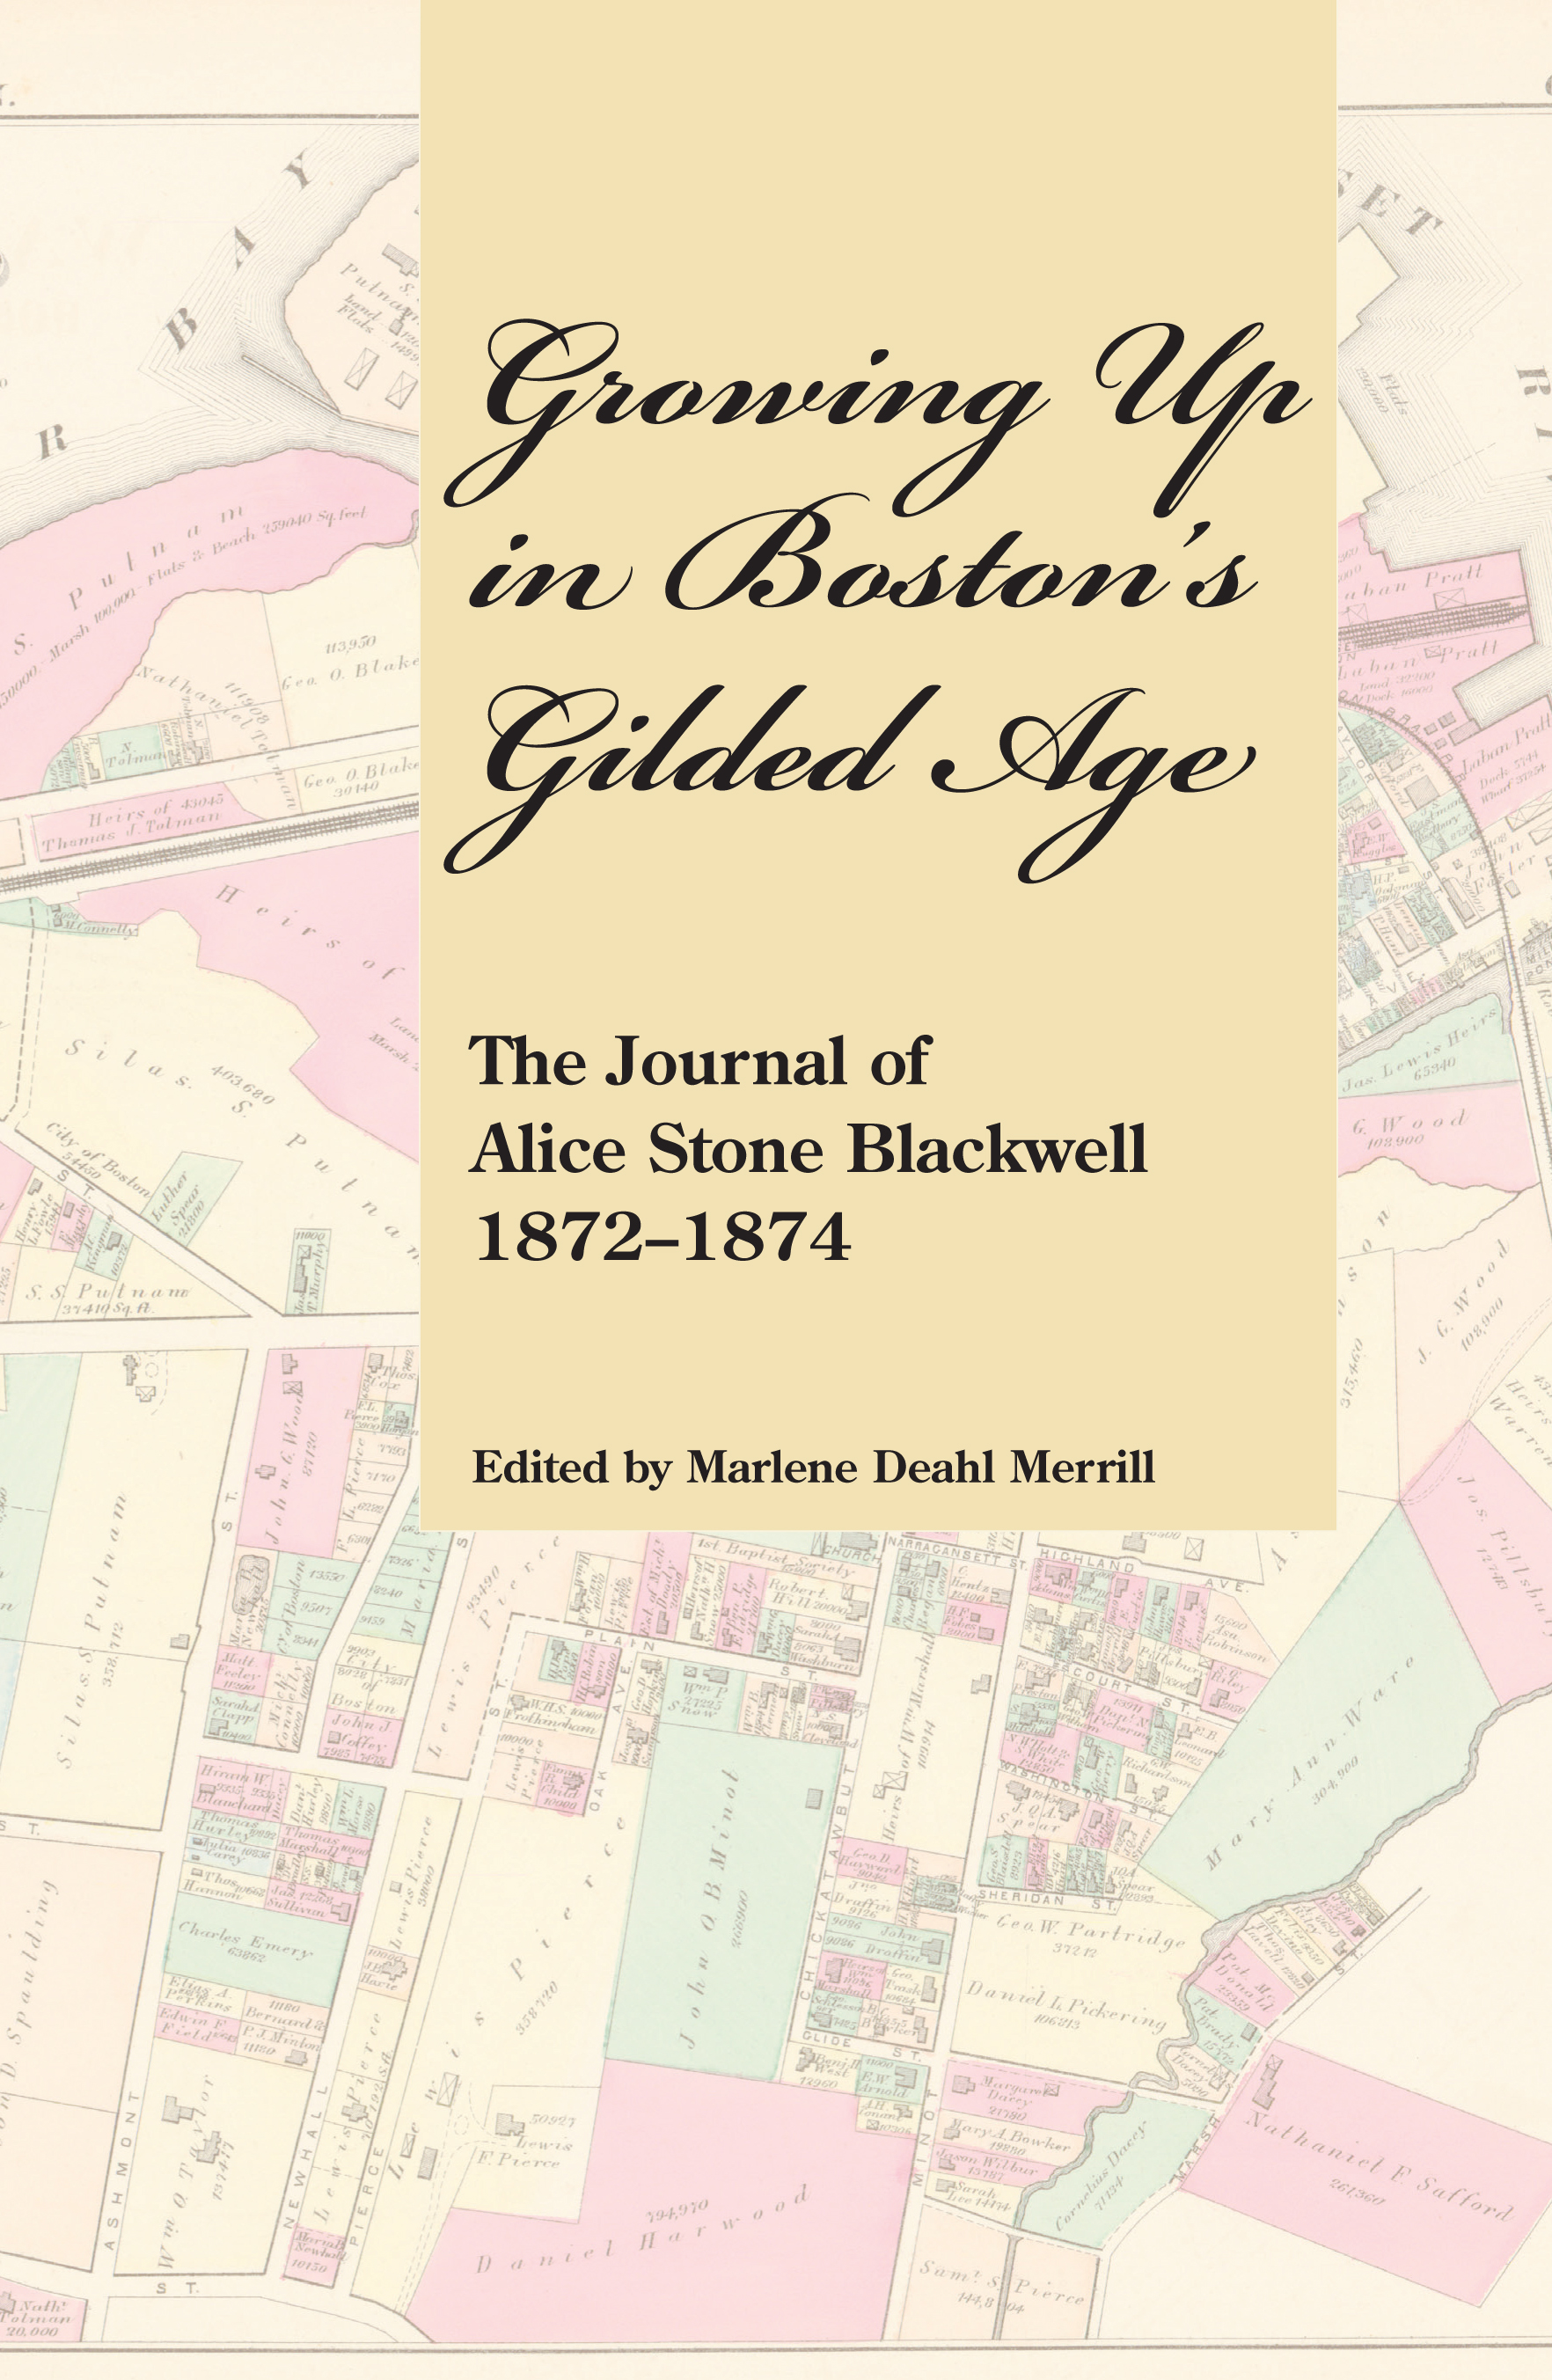 Growing up in Boston’s Gilded Age: The Journal of Alice Stone Blackwell, 1872-1874